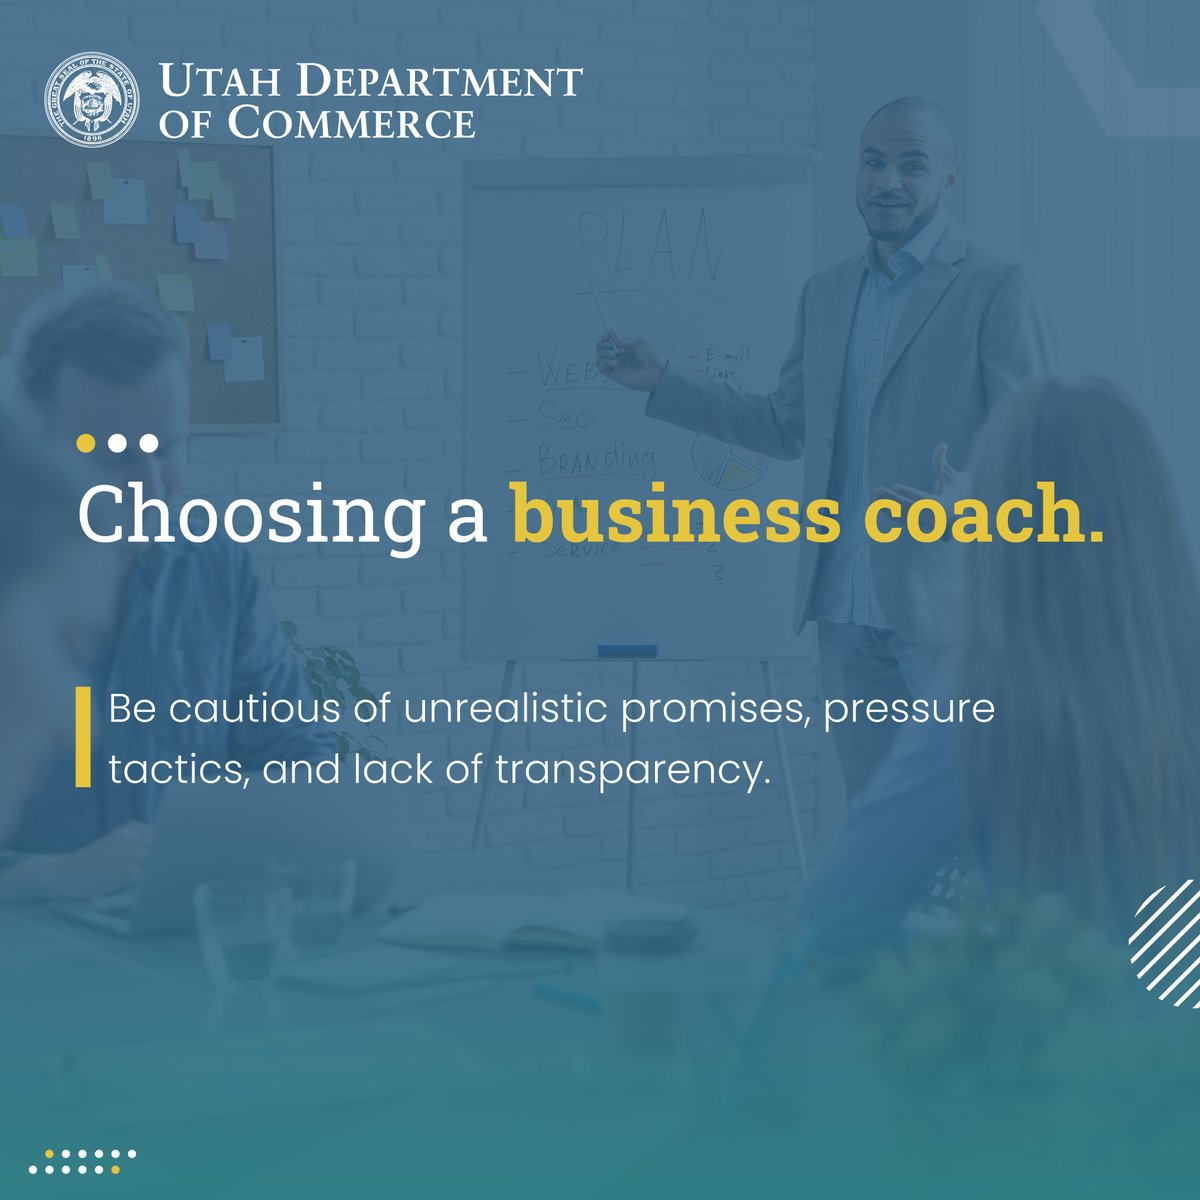 When selecting a business coach, be cautious of unrealistic promises, pressure tactics, and lack of transparency. Prioritize coaches who are upfront about their methods, credentials, and fees. Learn more: consumer.ftc.gov/consumer-alert…